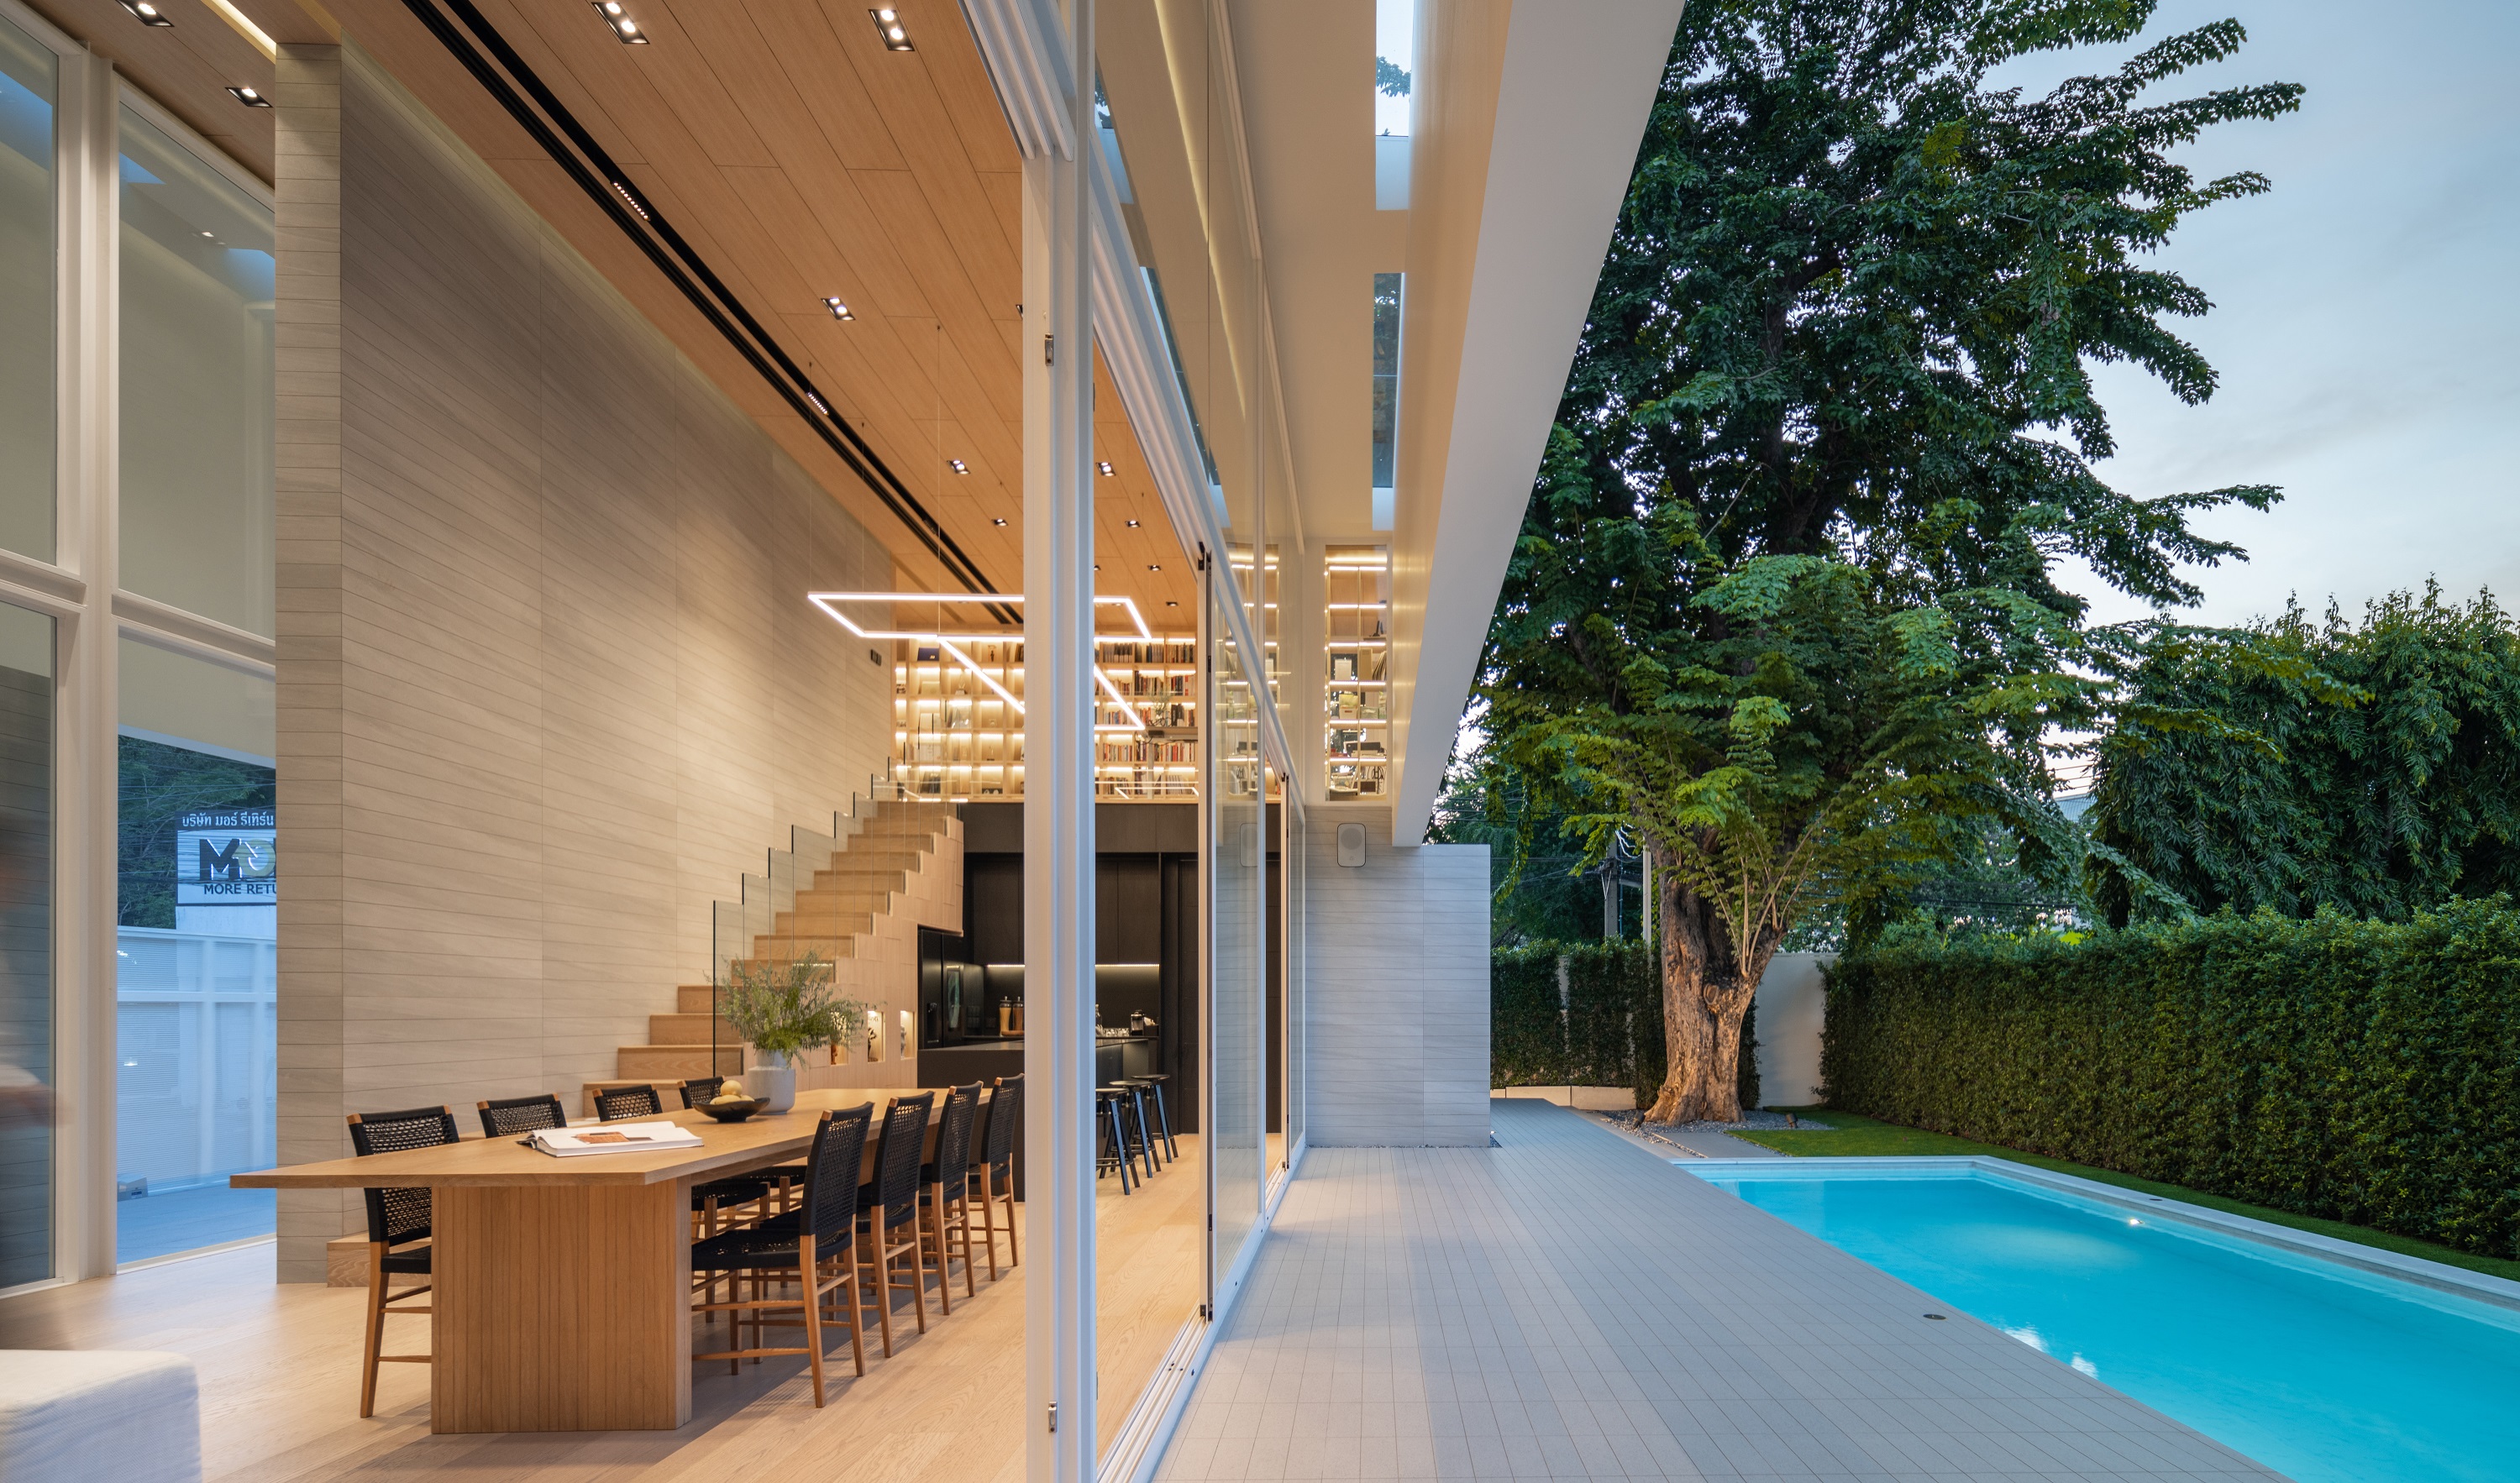 Pool and interior area view of TJ House, Photo by SkyGround architectural film & photography